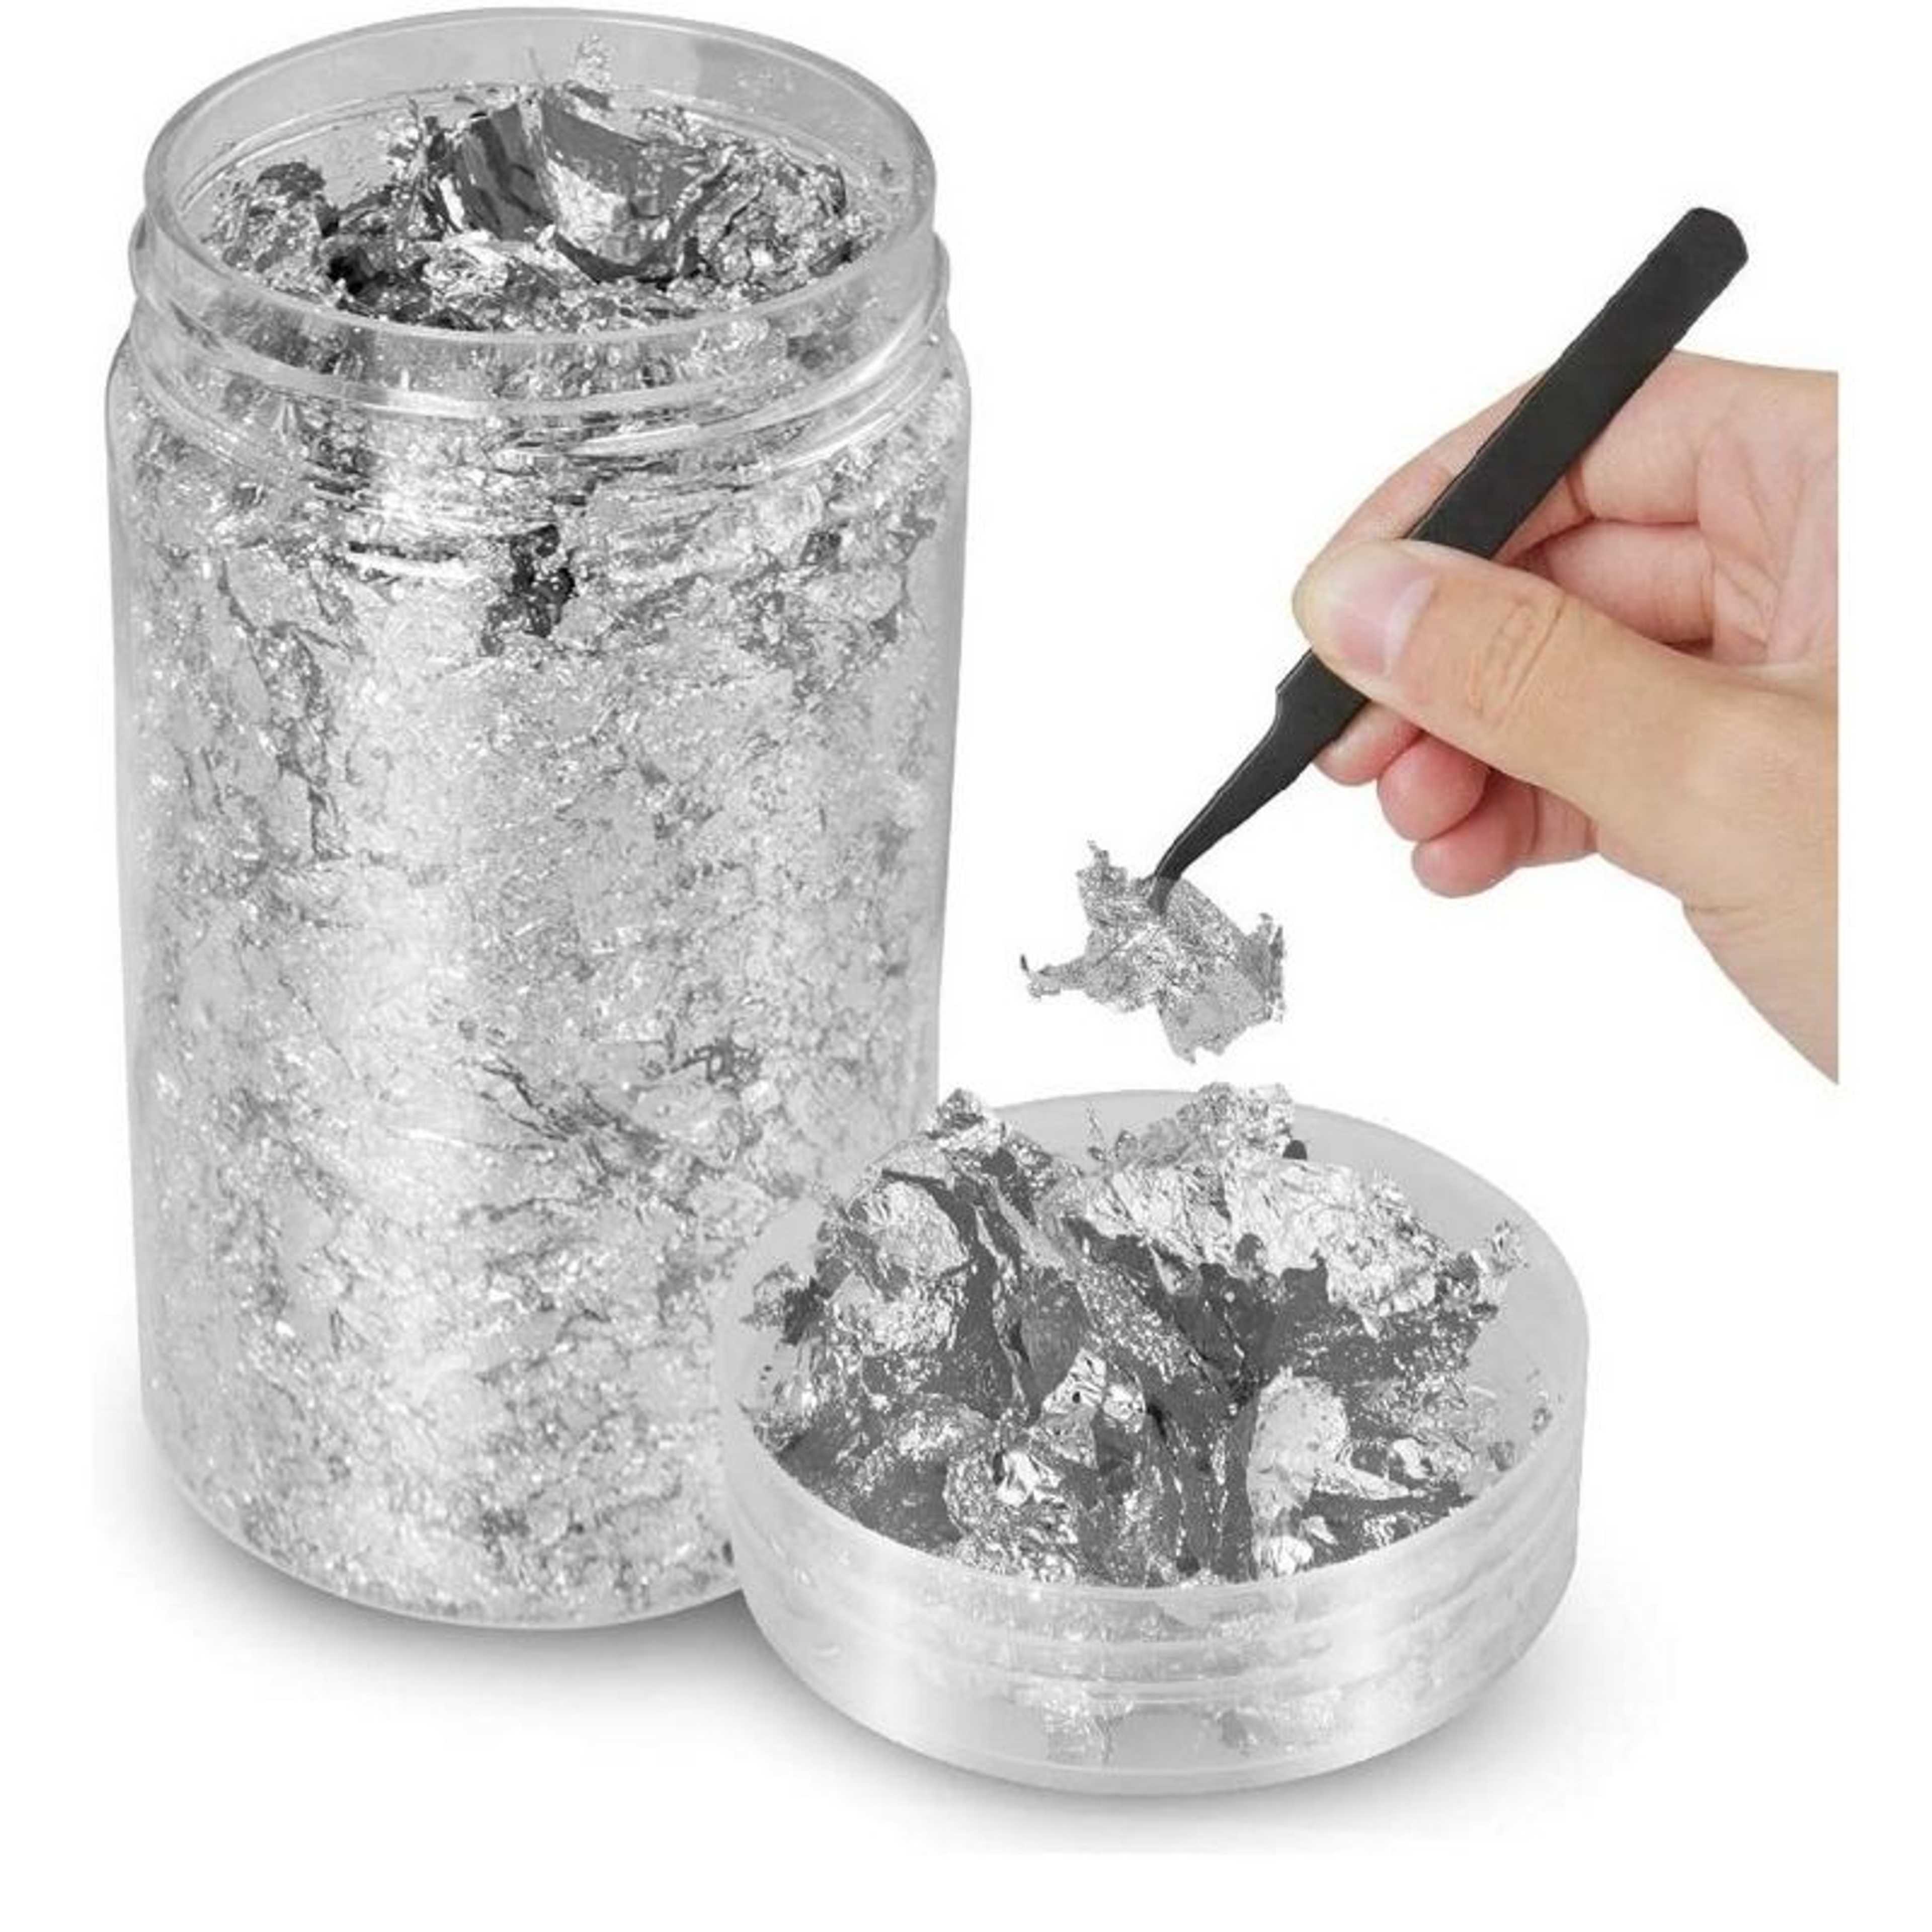 Multipurposed Foil Flakes for Resin Metallic Leaf Crushed Foil for Nails, Painting, Crafts, Slime, Painting and Resin Jewelry Making - Crushed Foil Container 2gm